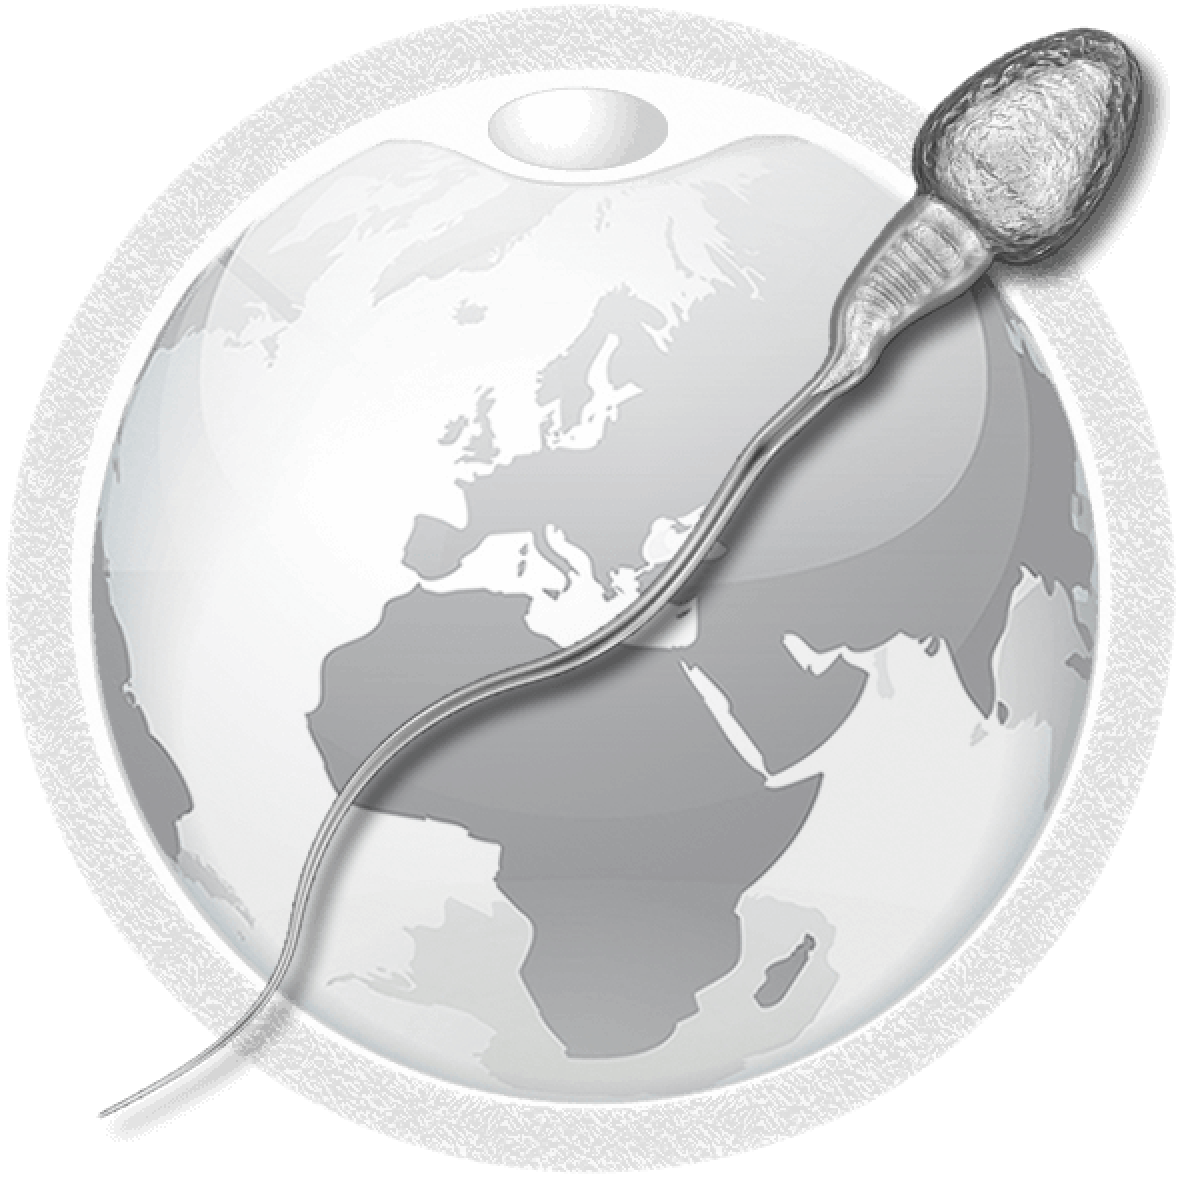 The International IVF Initiative: A Leap Forward for Embryologists and Reproductive Scientists